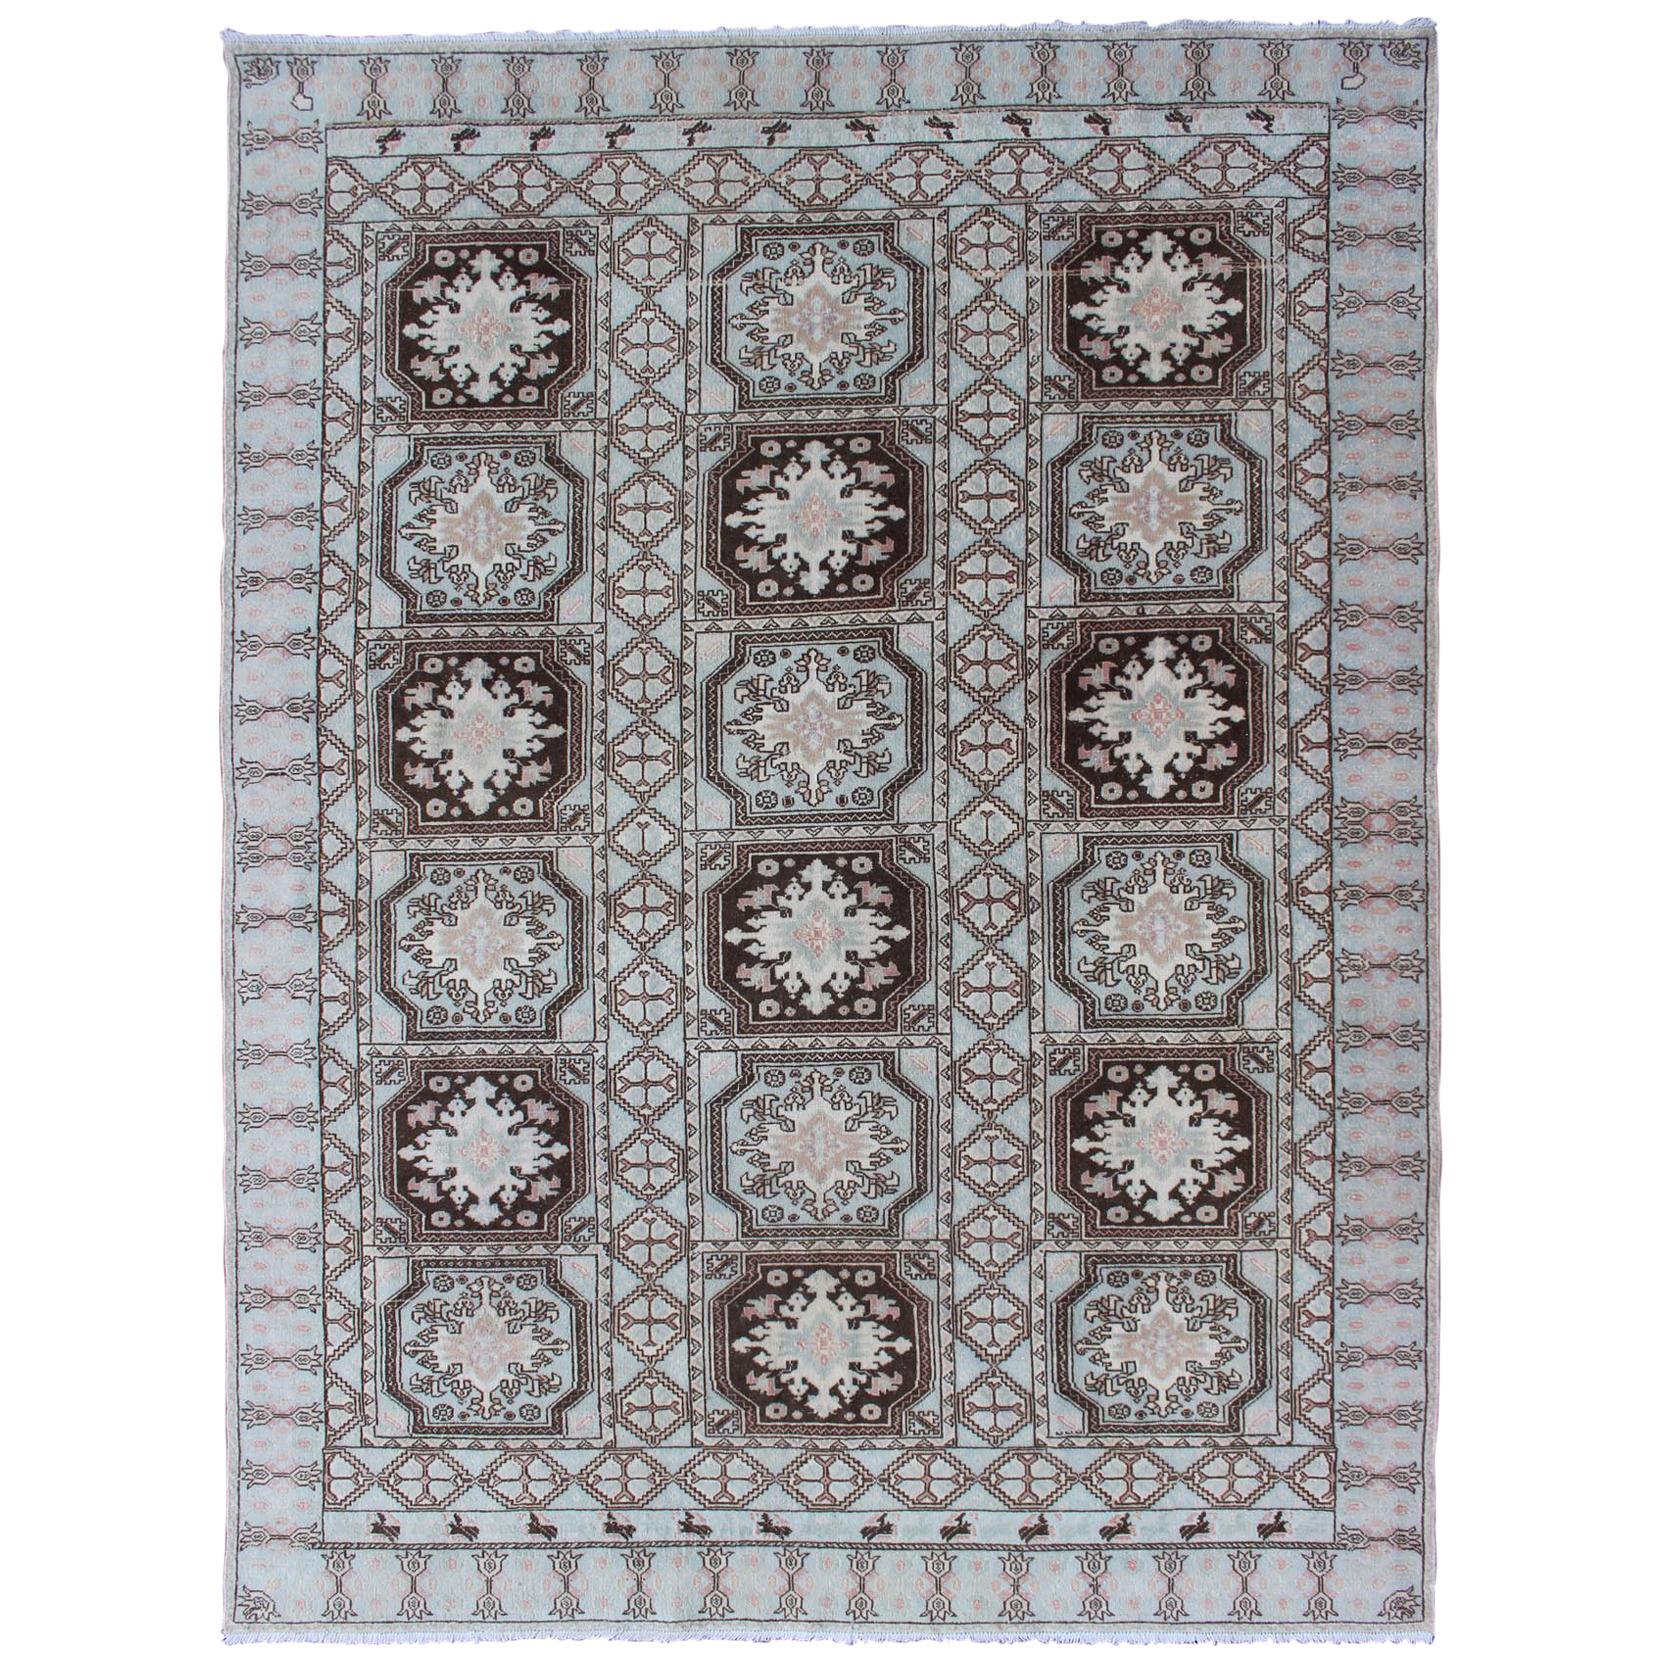 Vintage Moroccan Rug with Medallions in Black and Light Blue